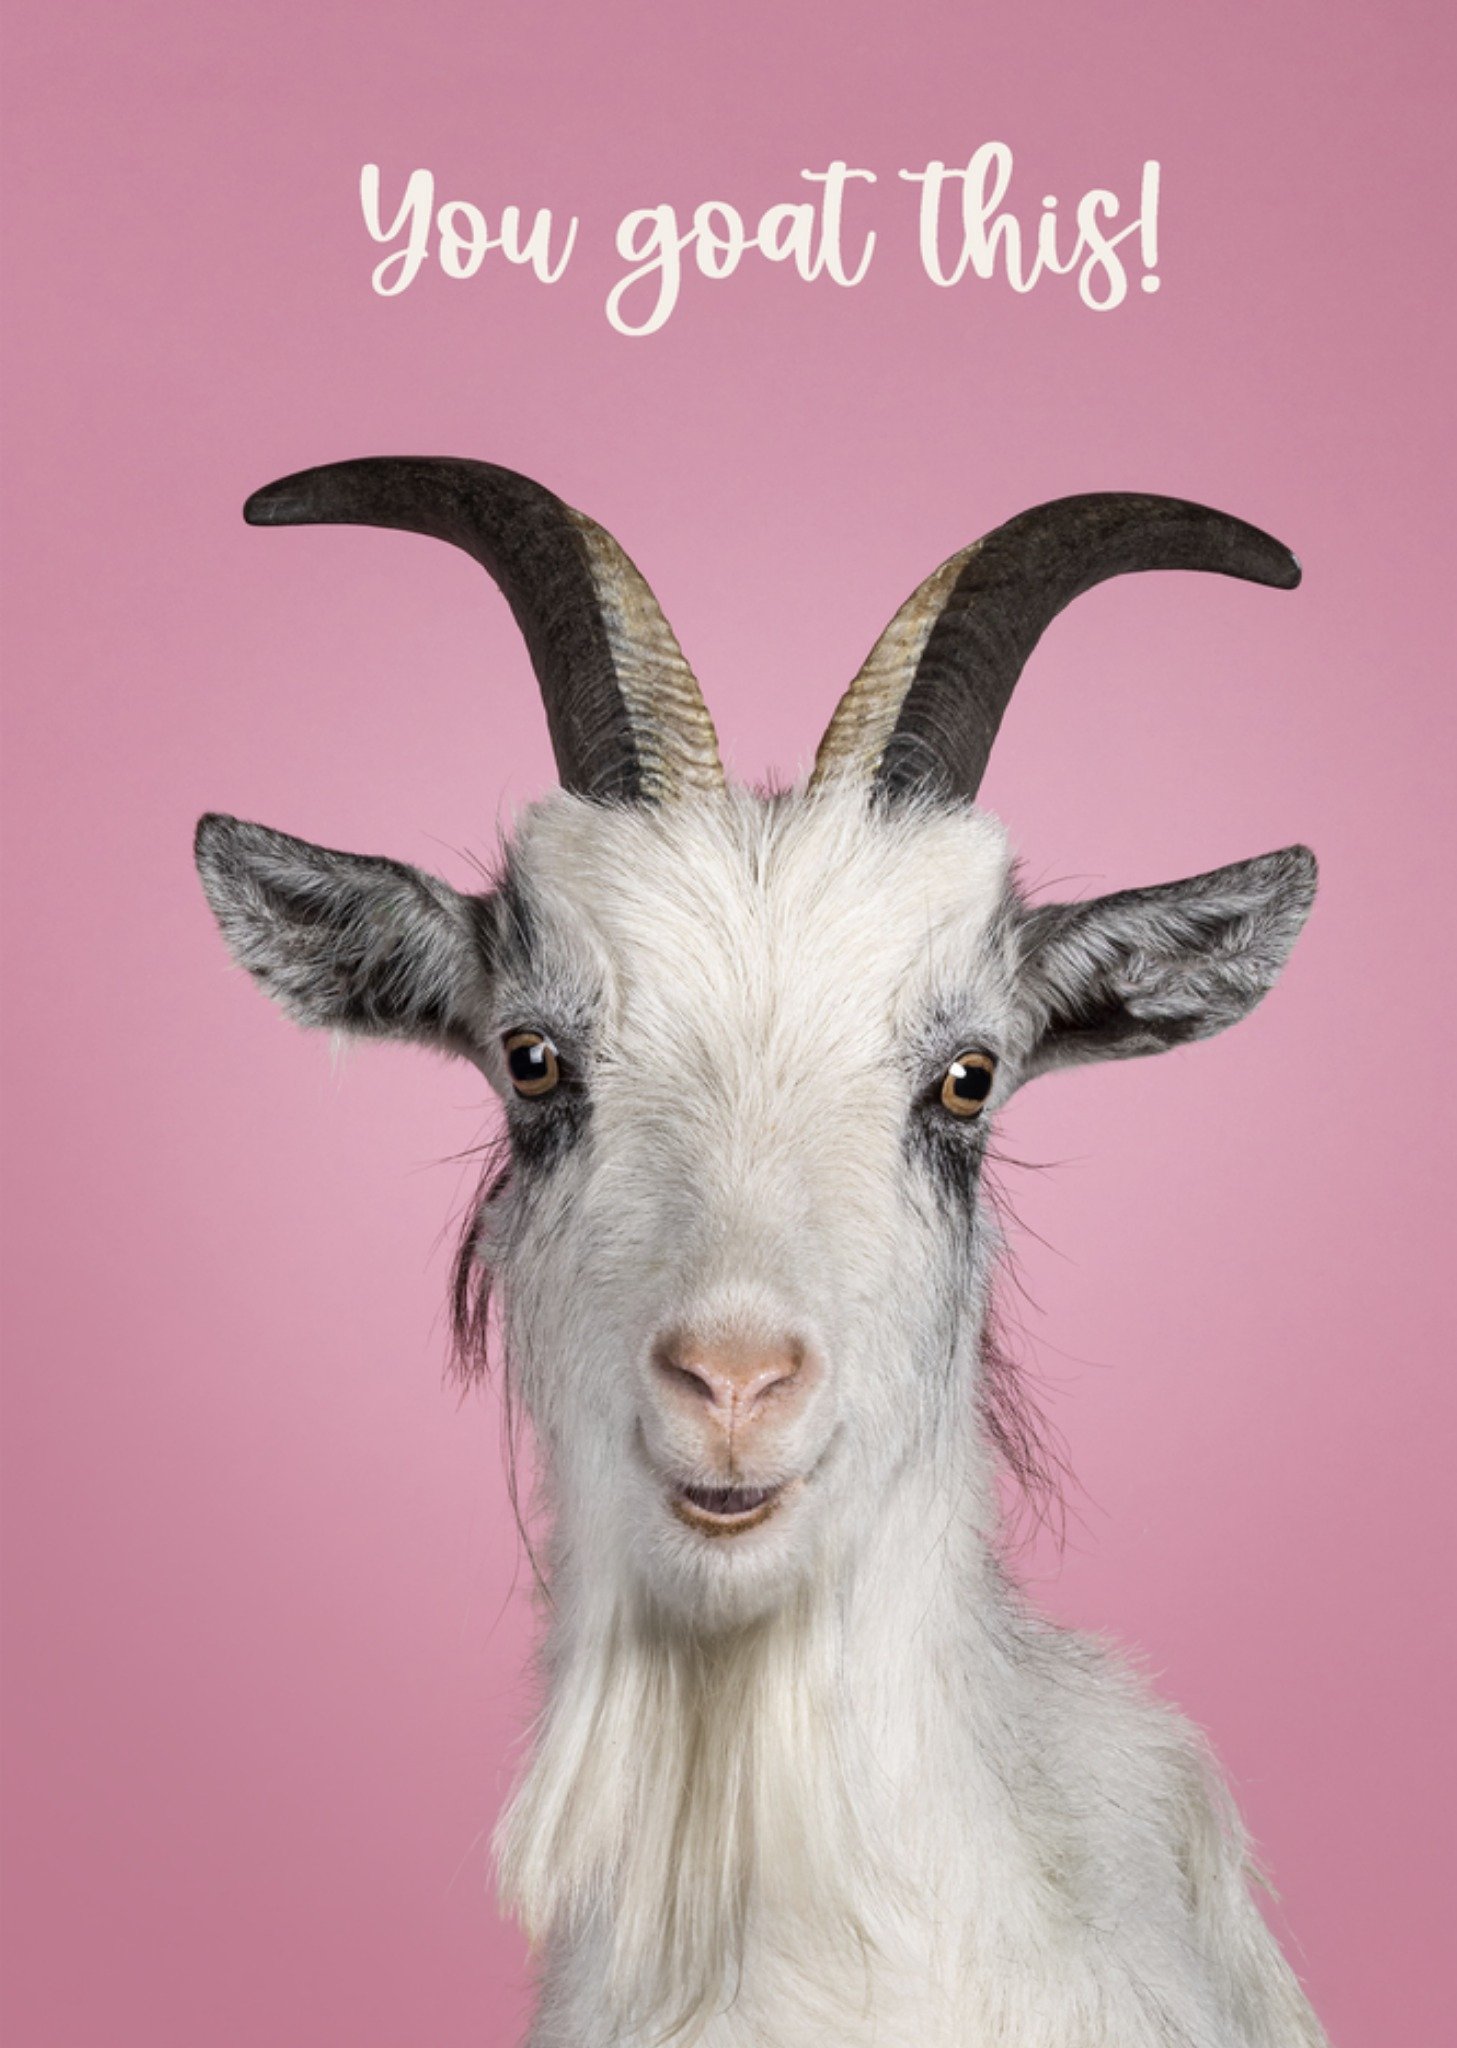 Catchy Images - Succeskaart - You goat this! - Grappig